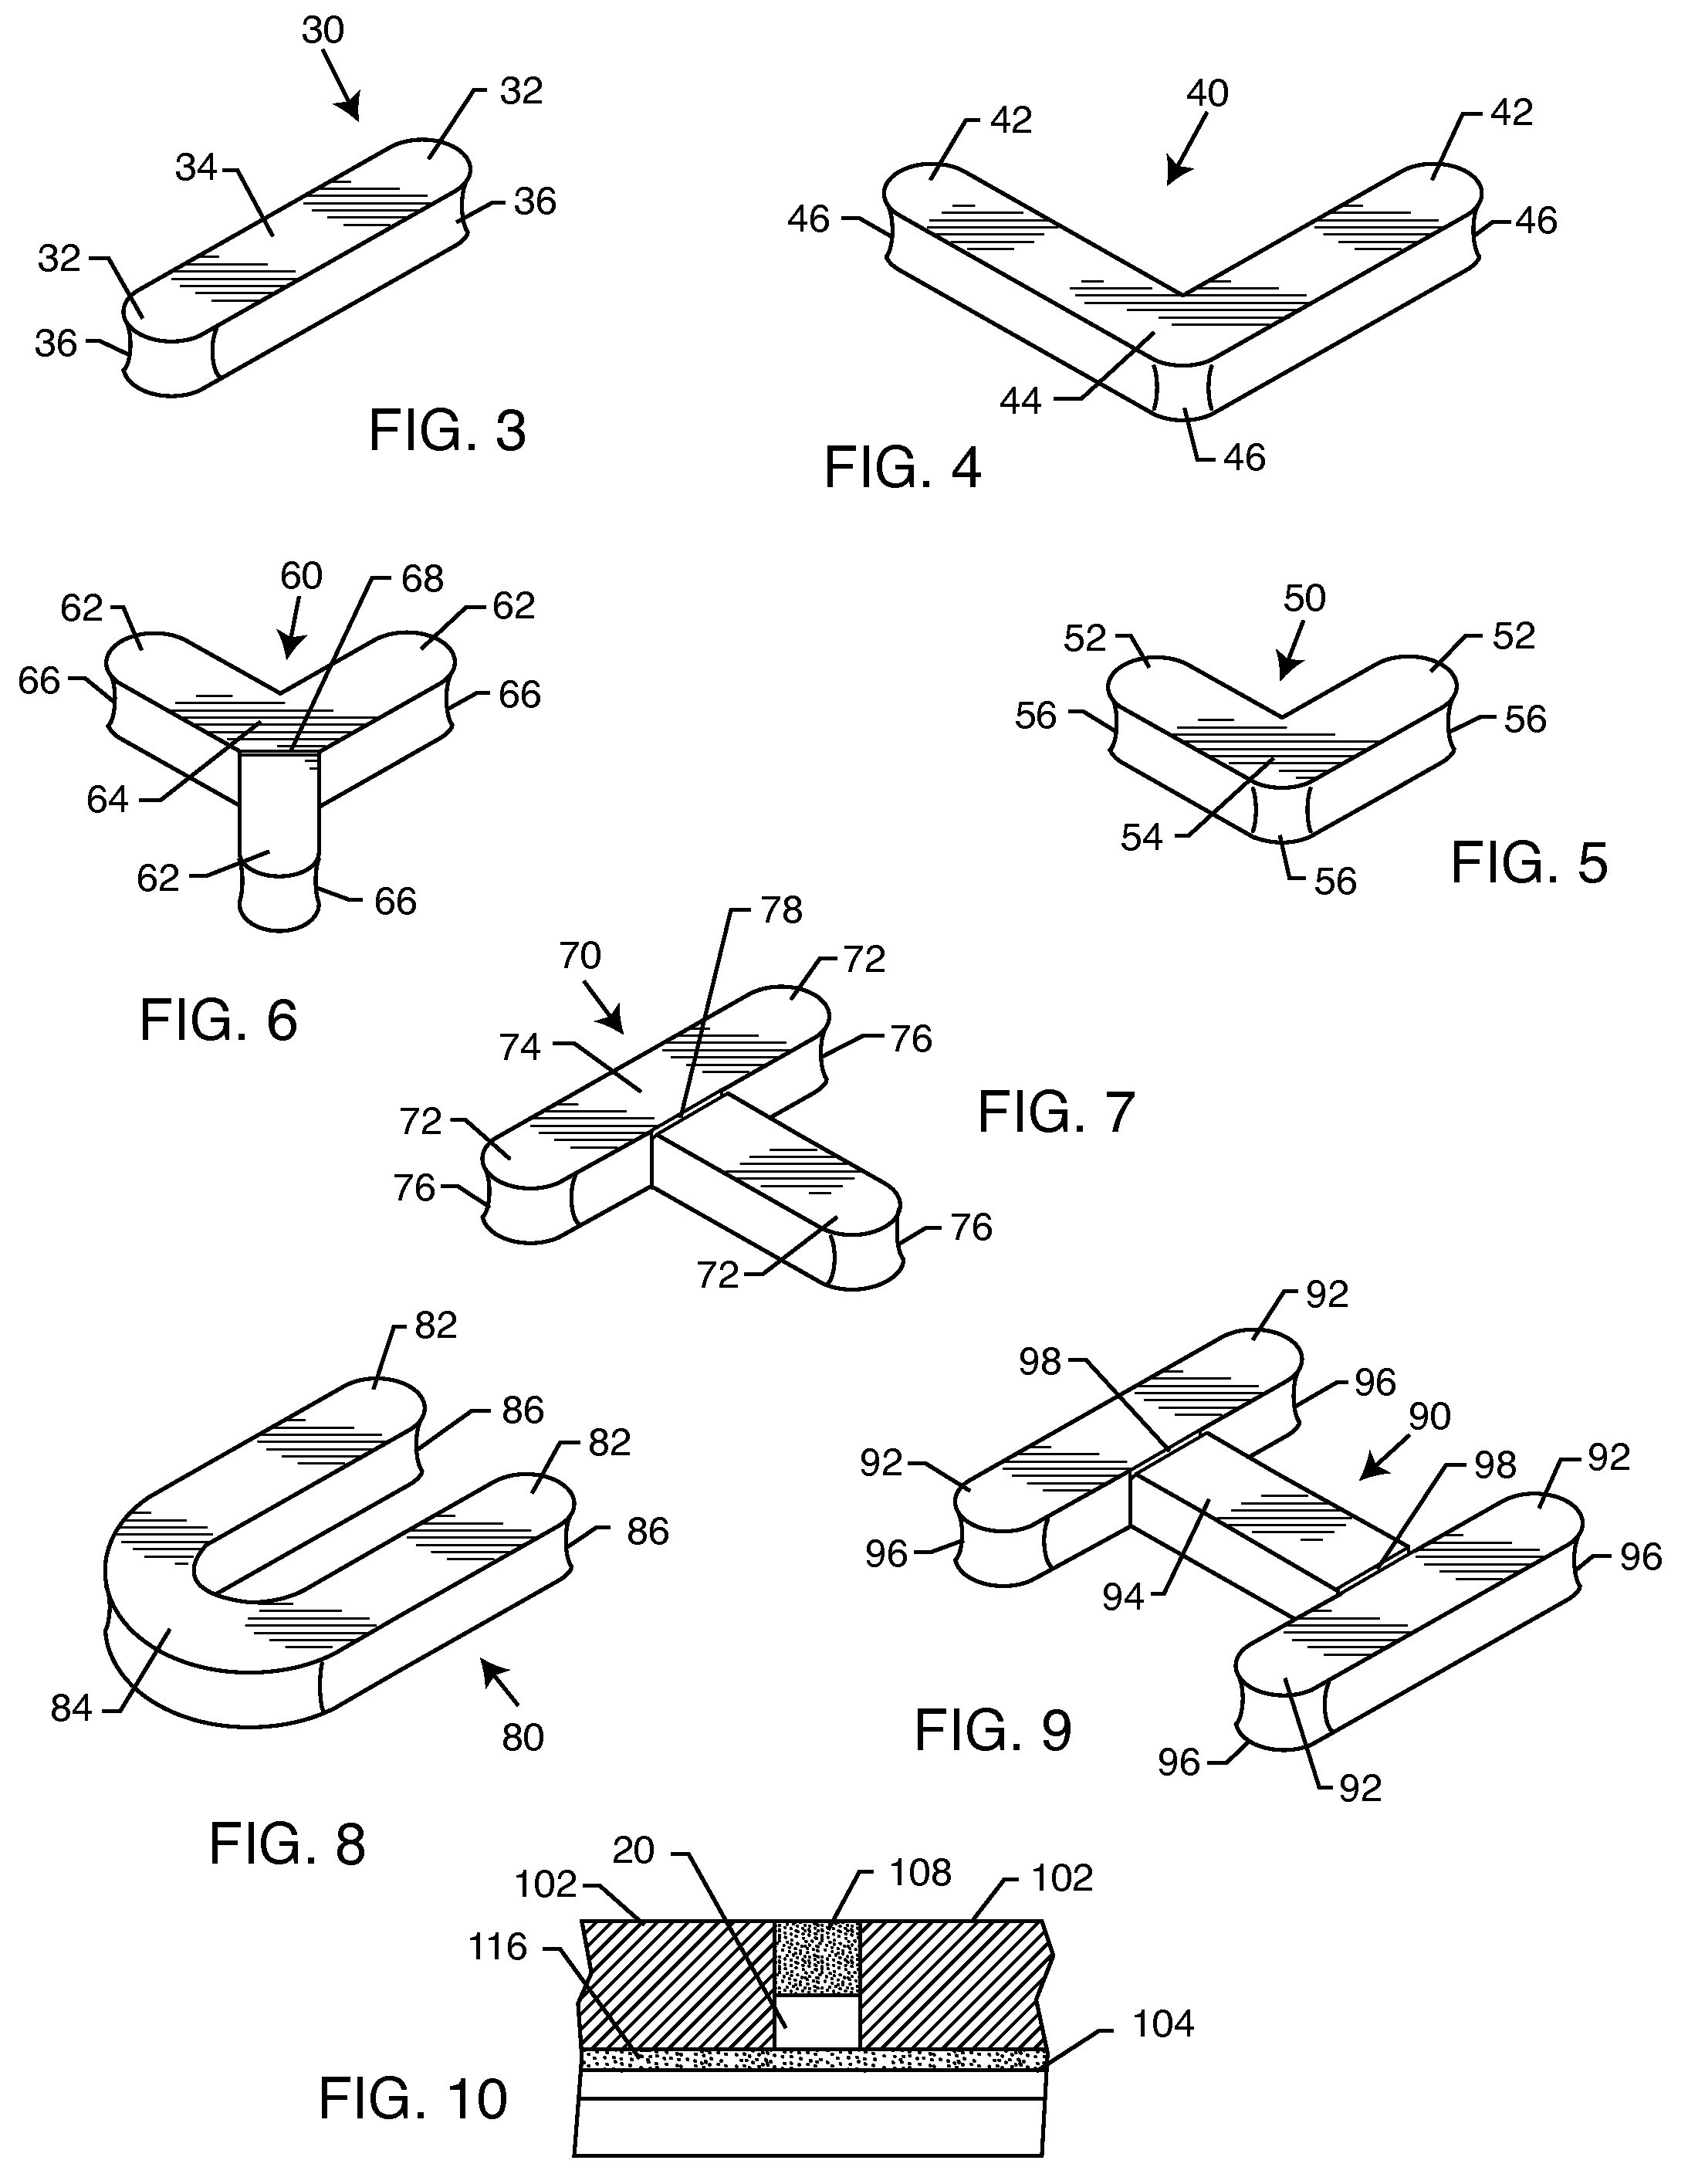 Cement-based tile-setting spacers and related process